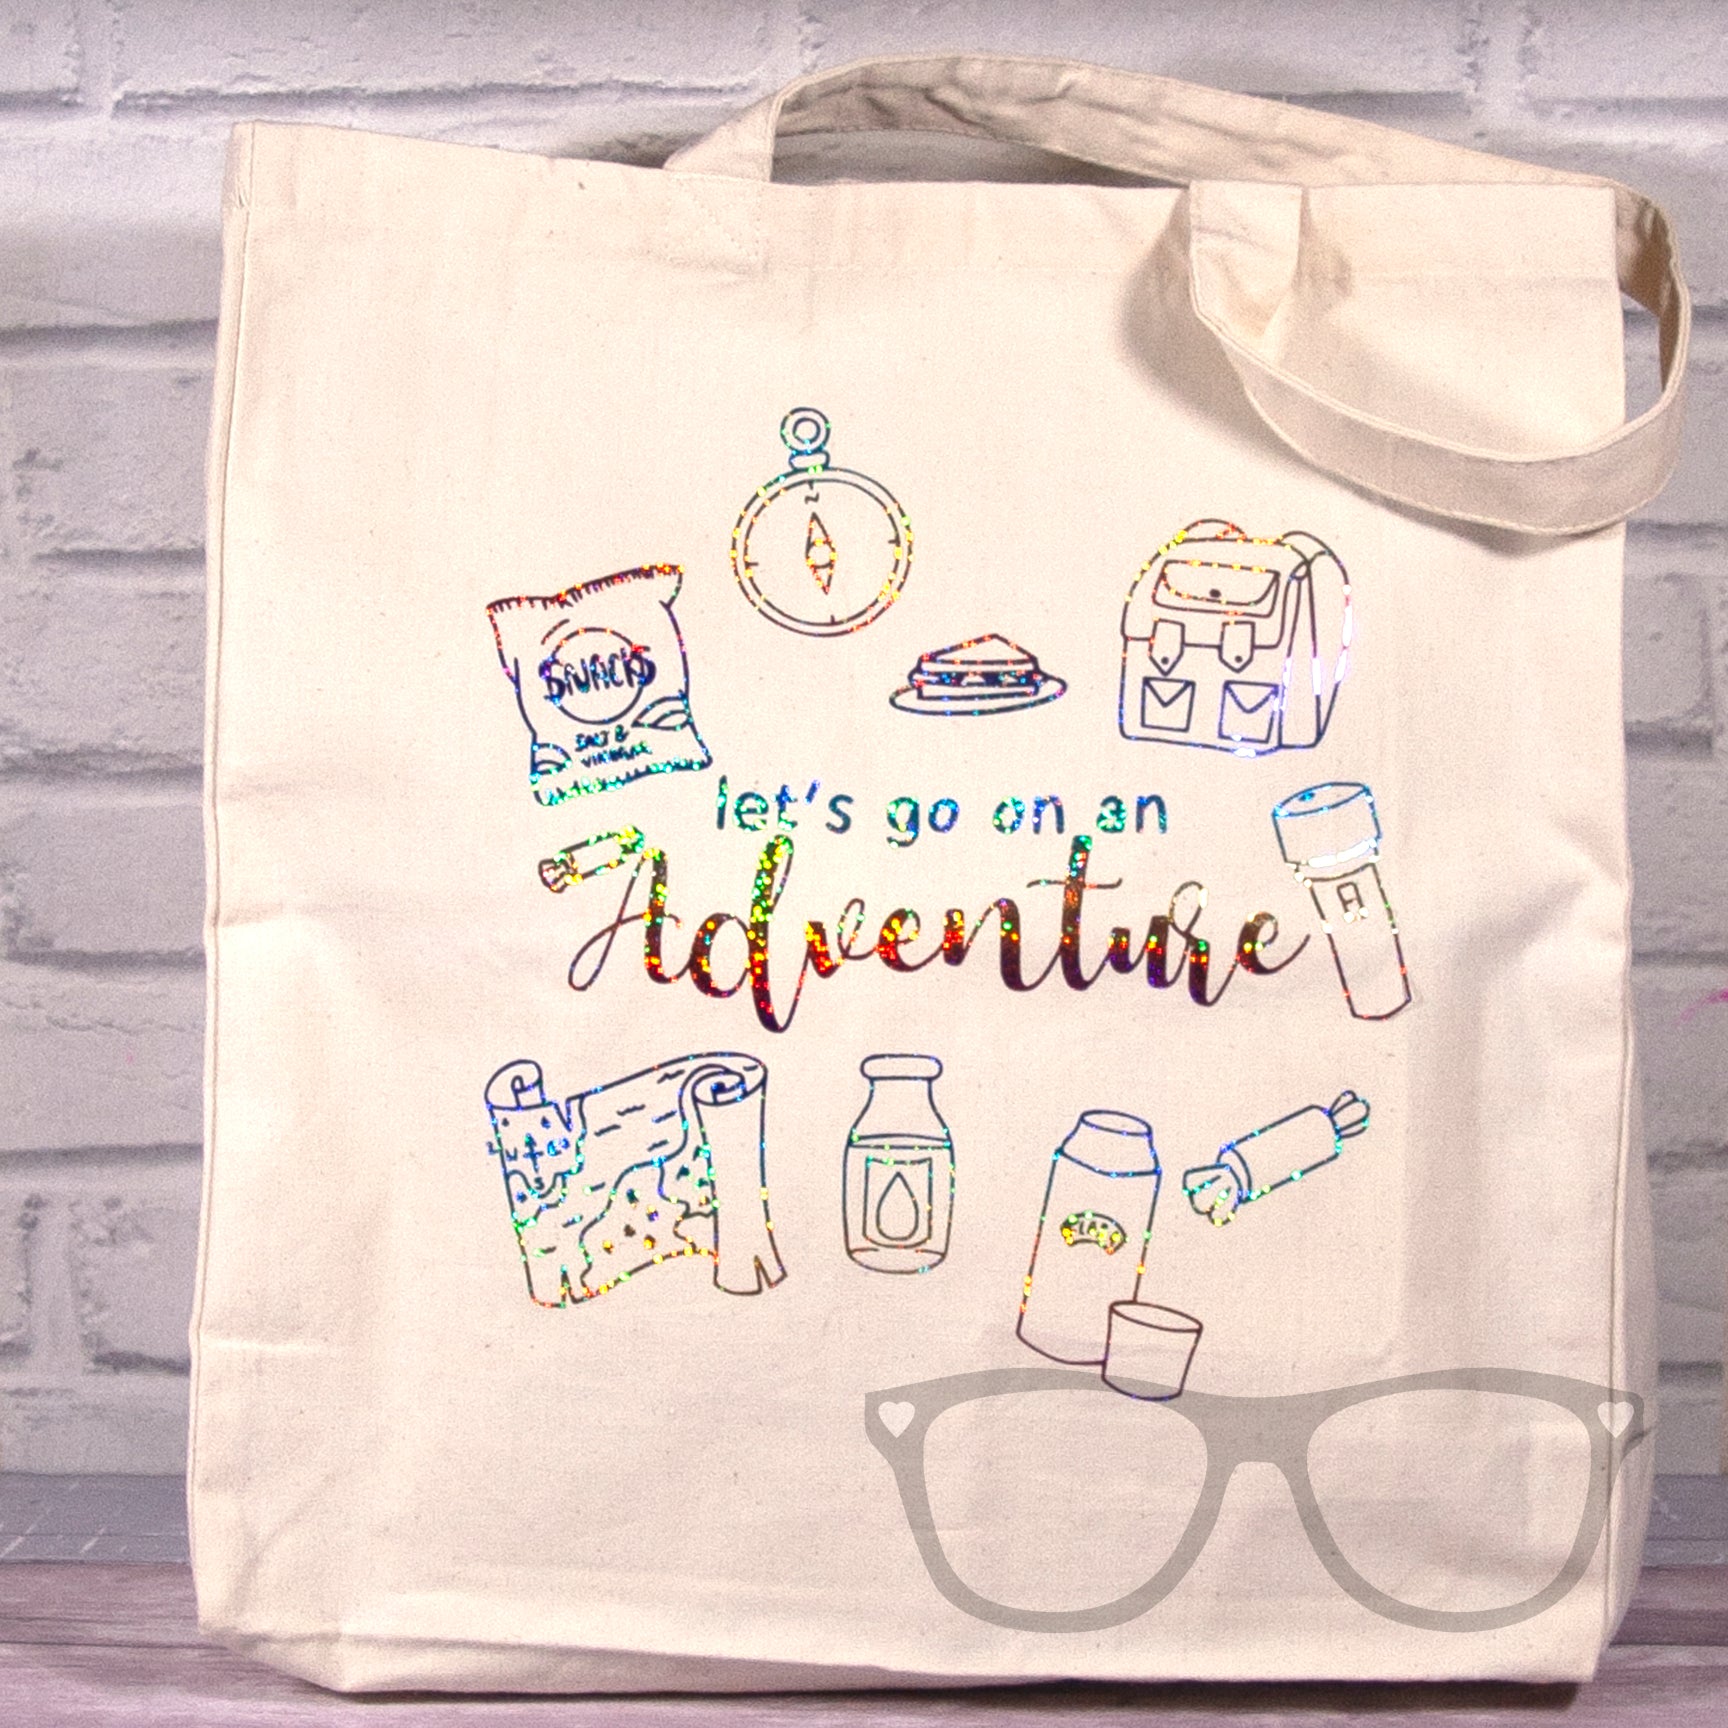 Limited Edition Tote bag with rainbow foil design, the text reads "Let's go on an adventure and features things you would take on an adventure